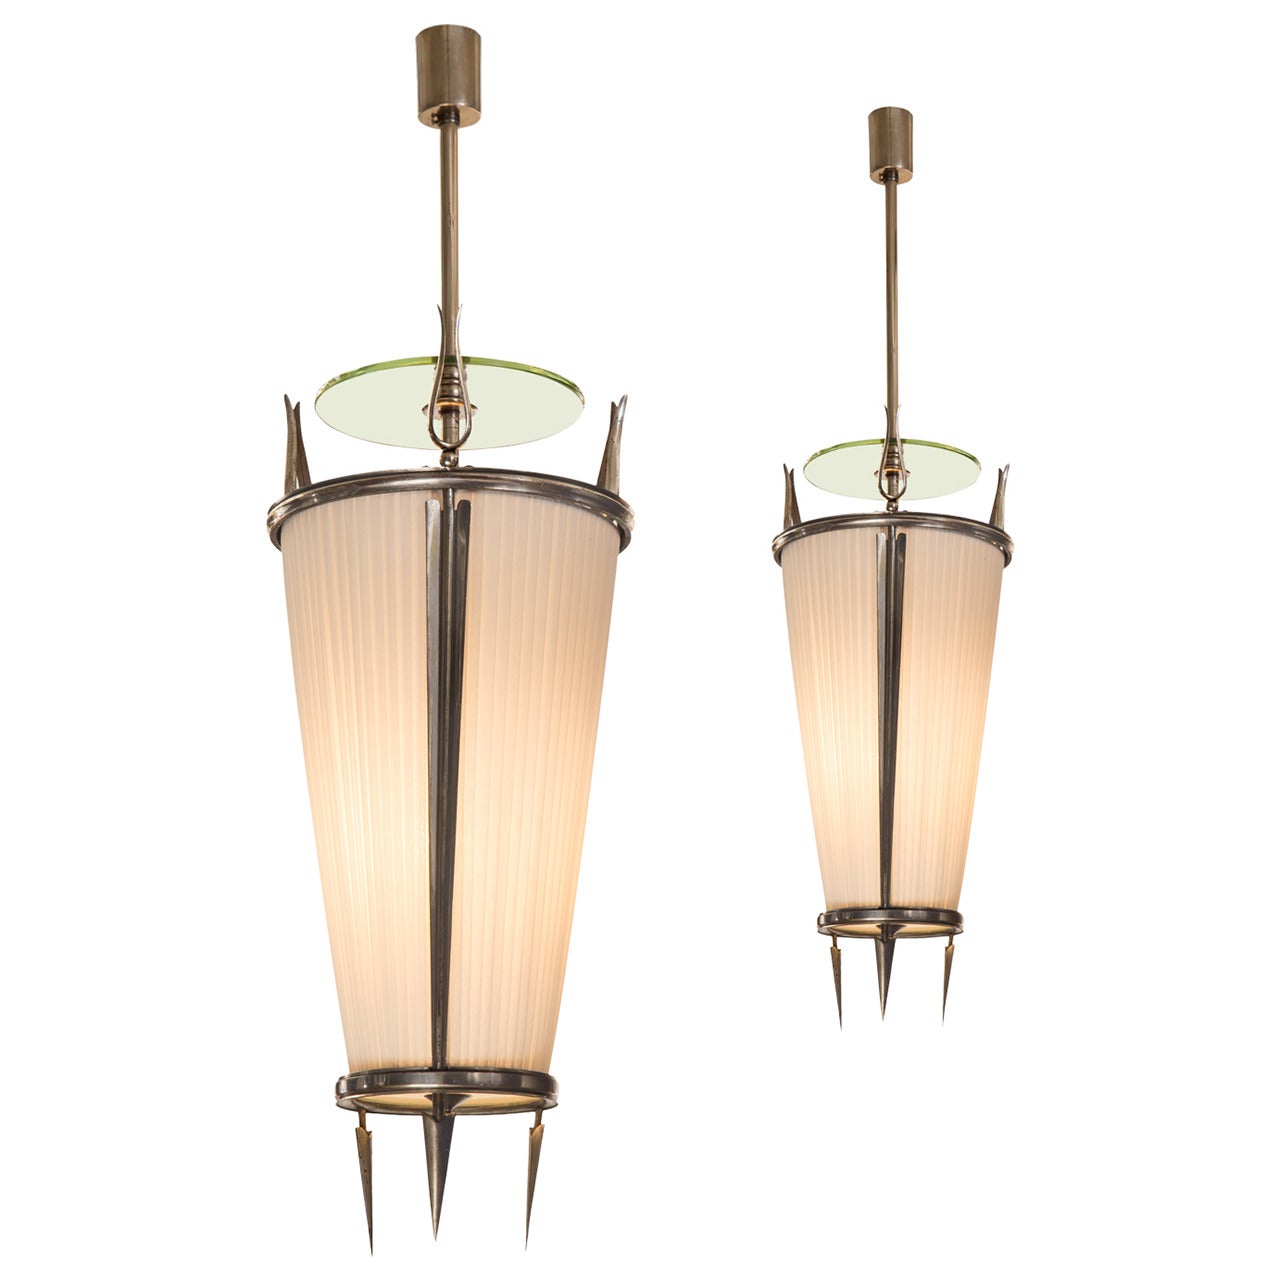 Paolo Buffa for Donzelli, a Pair of Silvered Bronze Lanterns